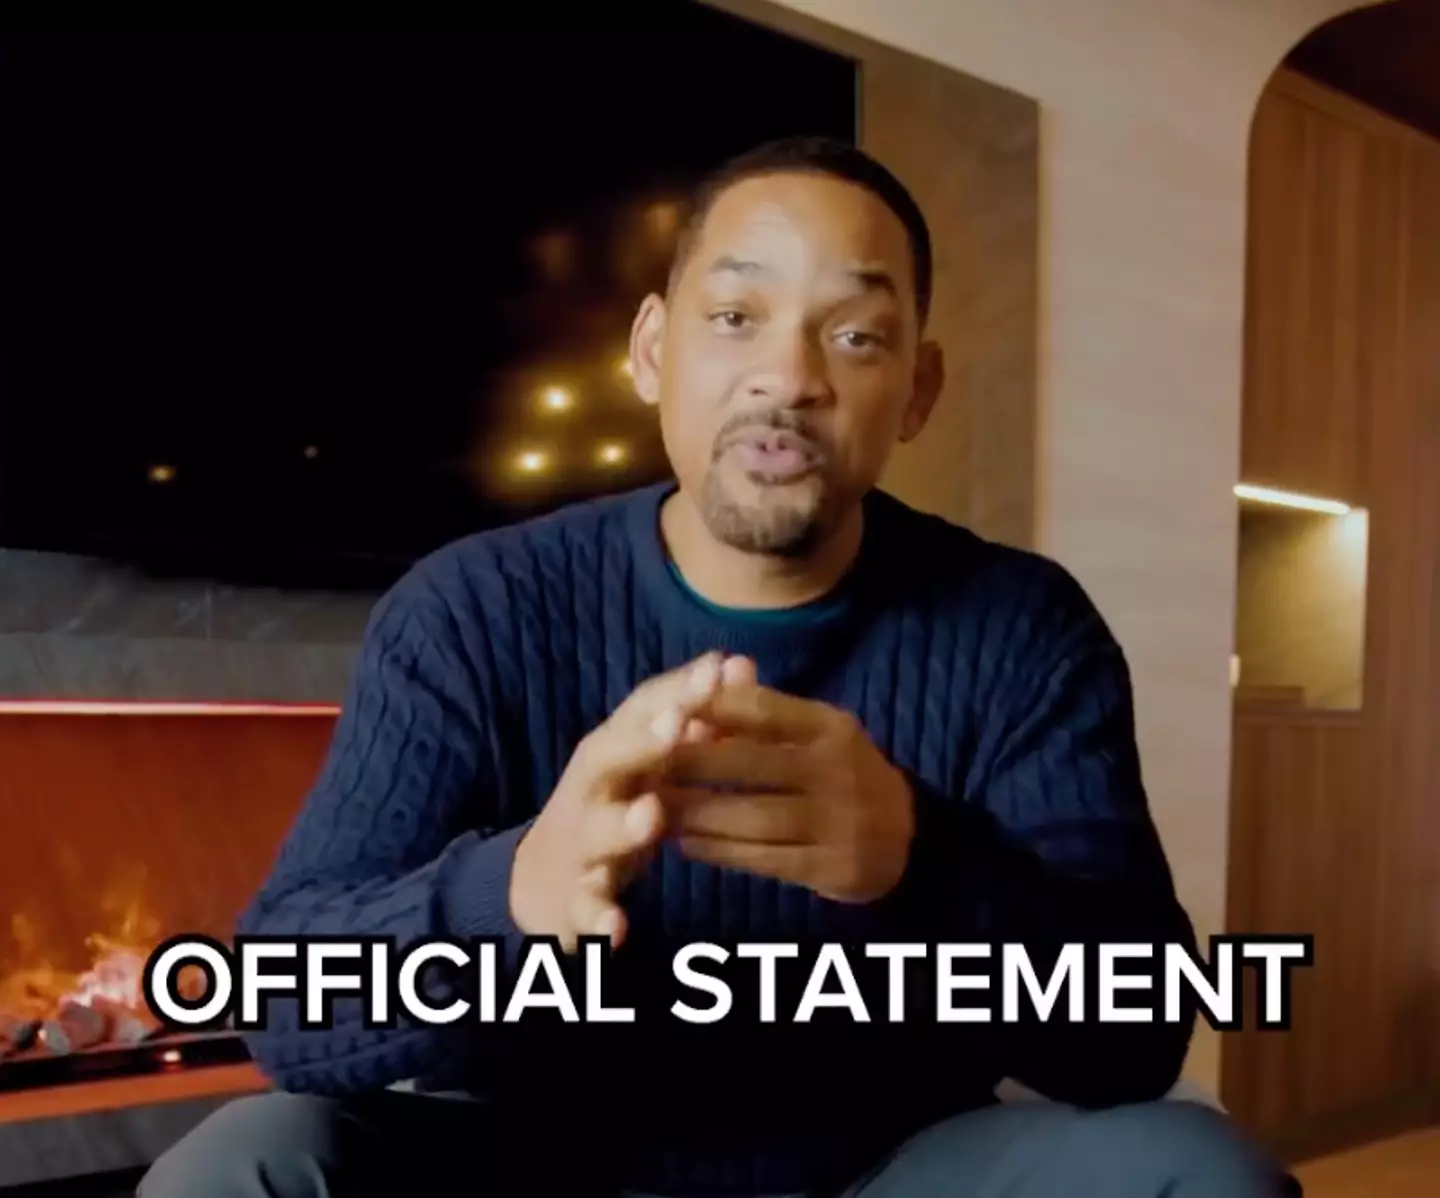 Will Smith decided to share his 'statement' after Jada's book was published.